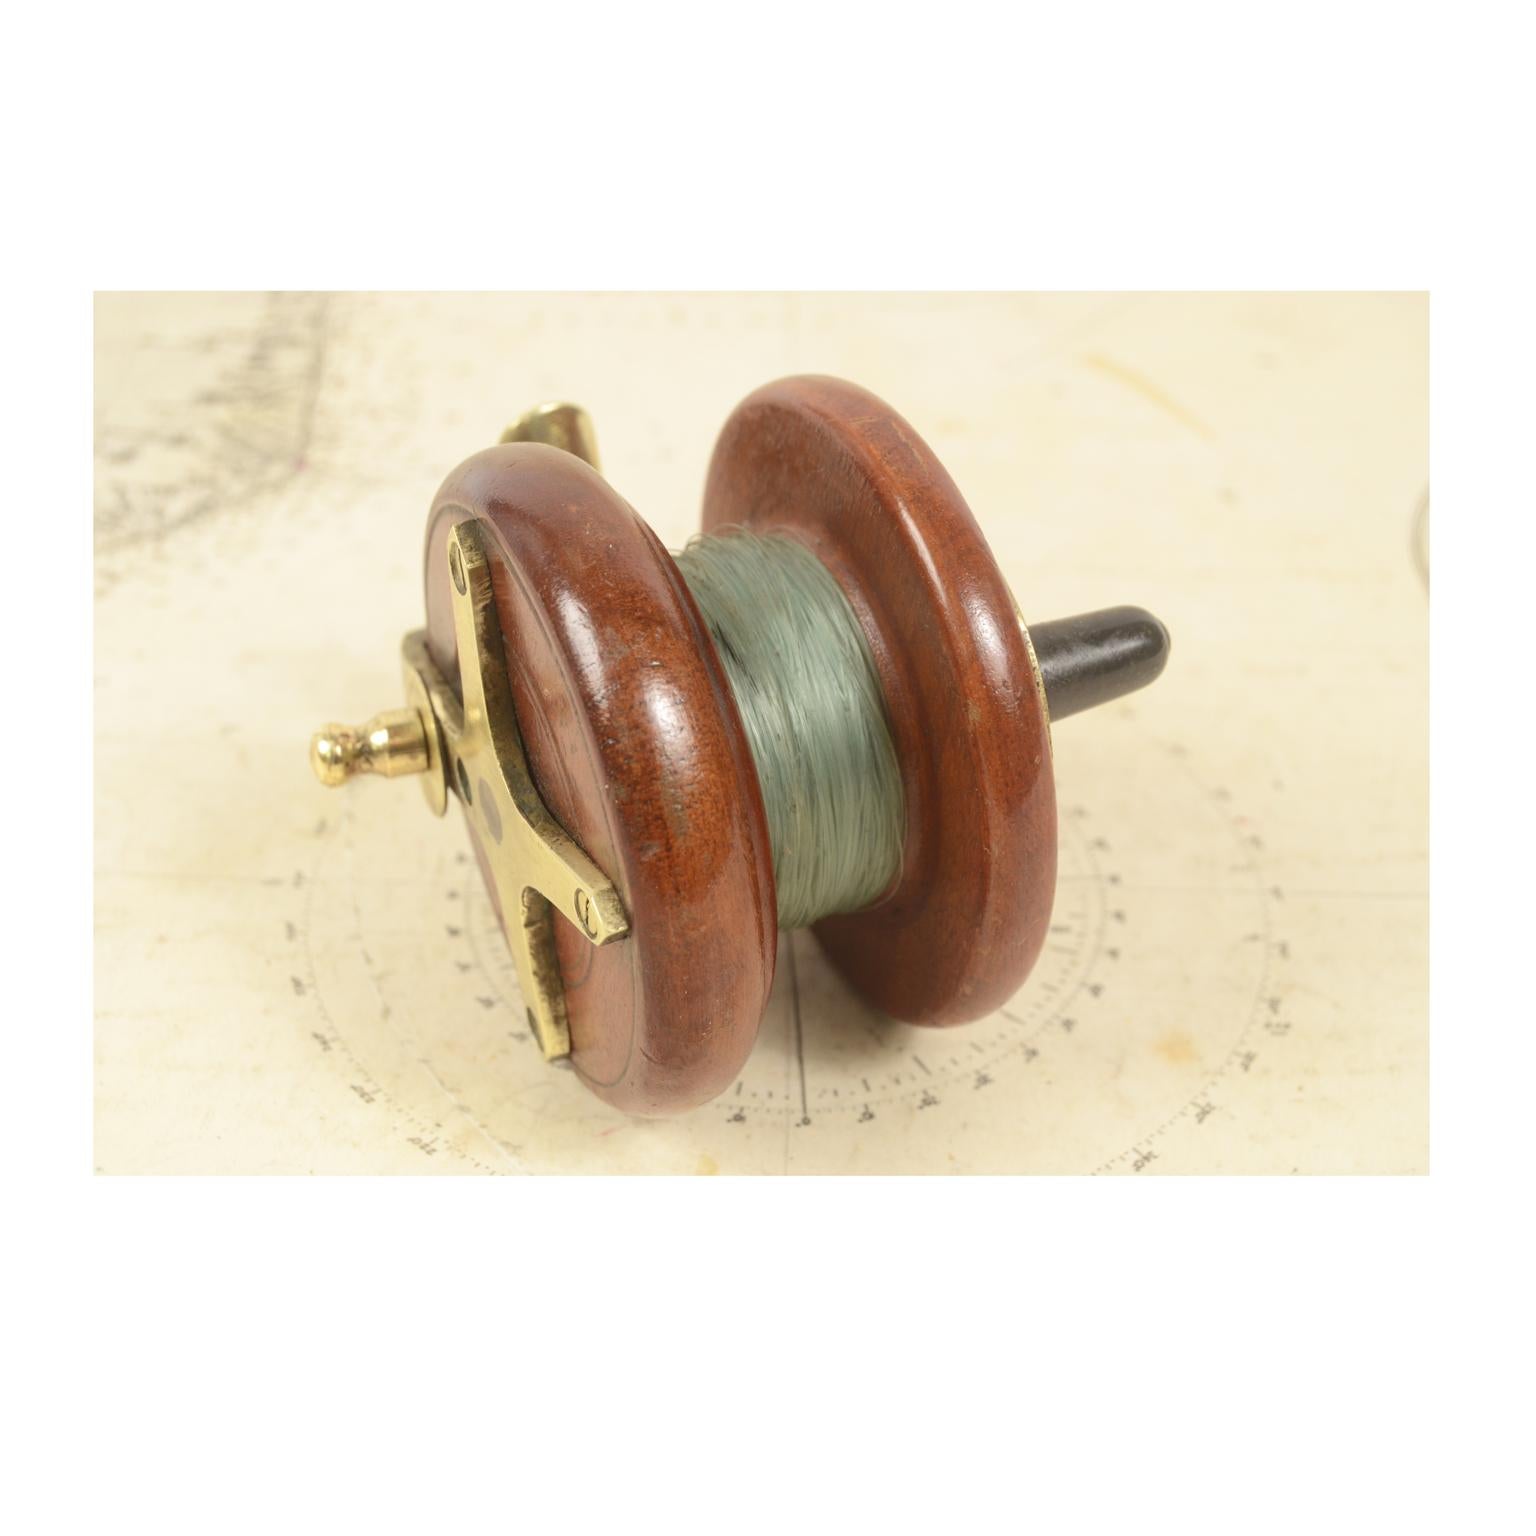 Fishing Reel Made of Turned Oak and Brass, UK, Early 1900s 2